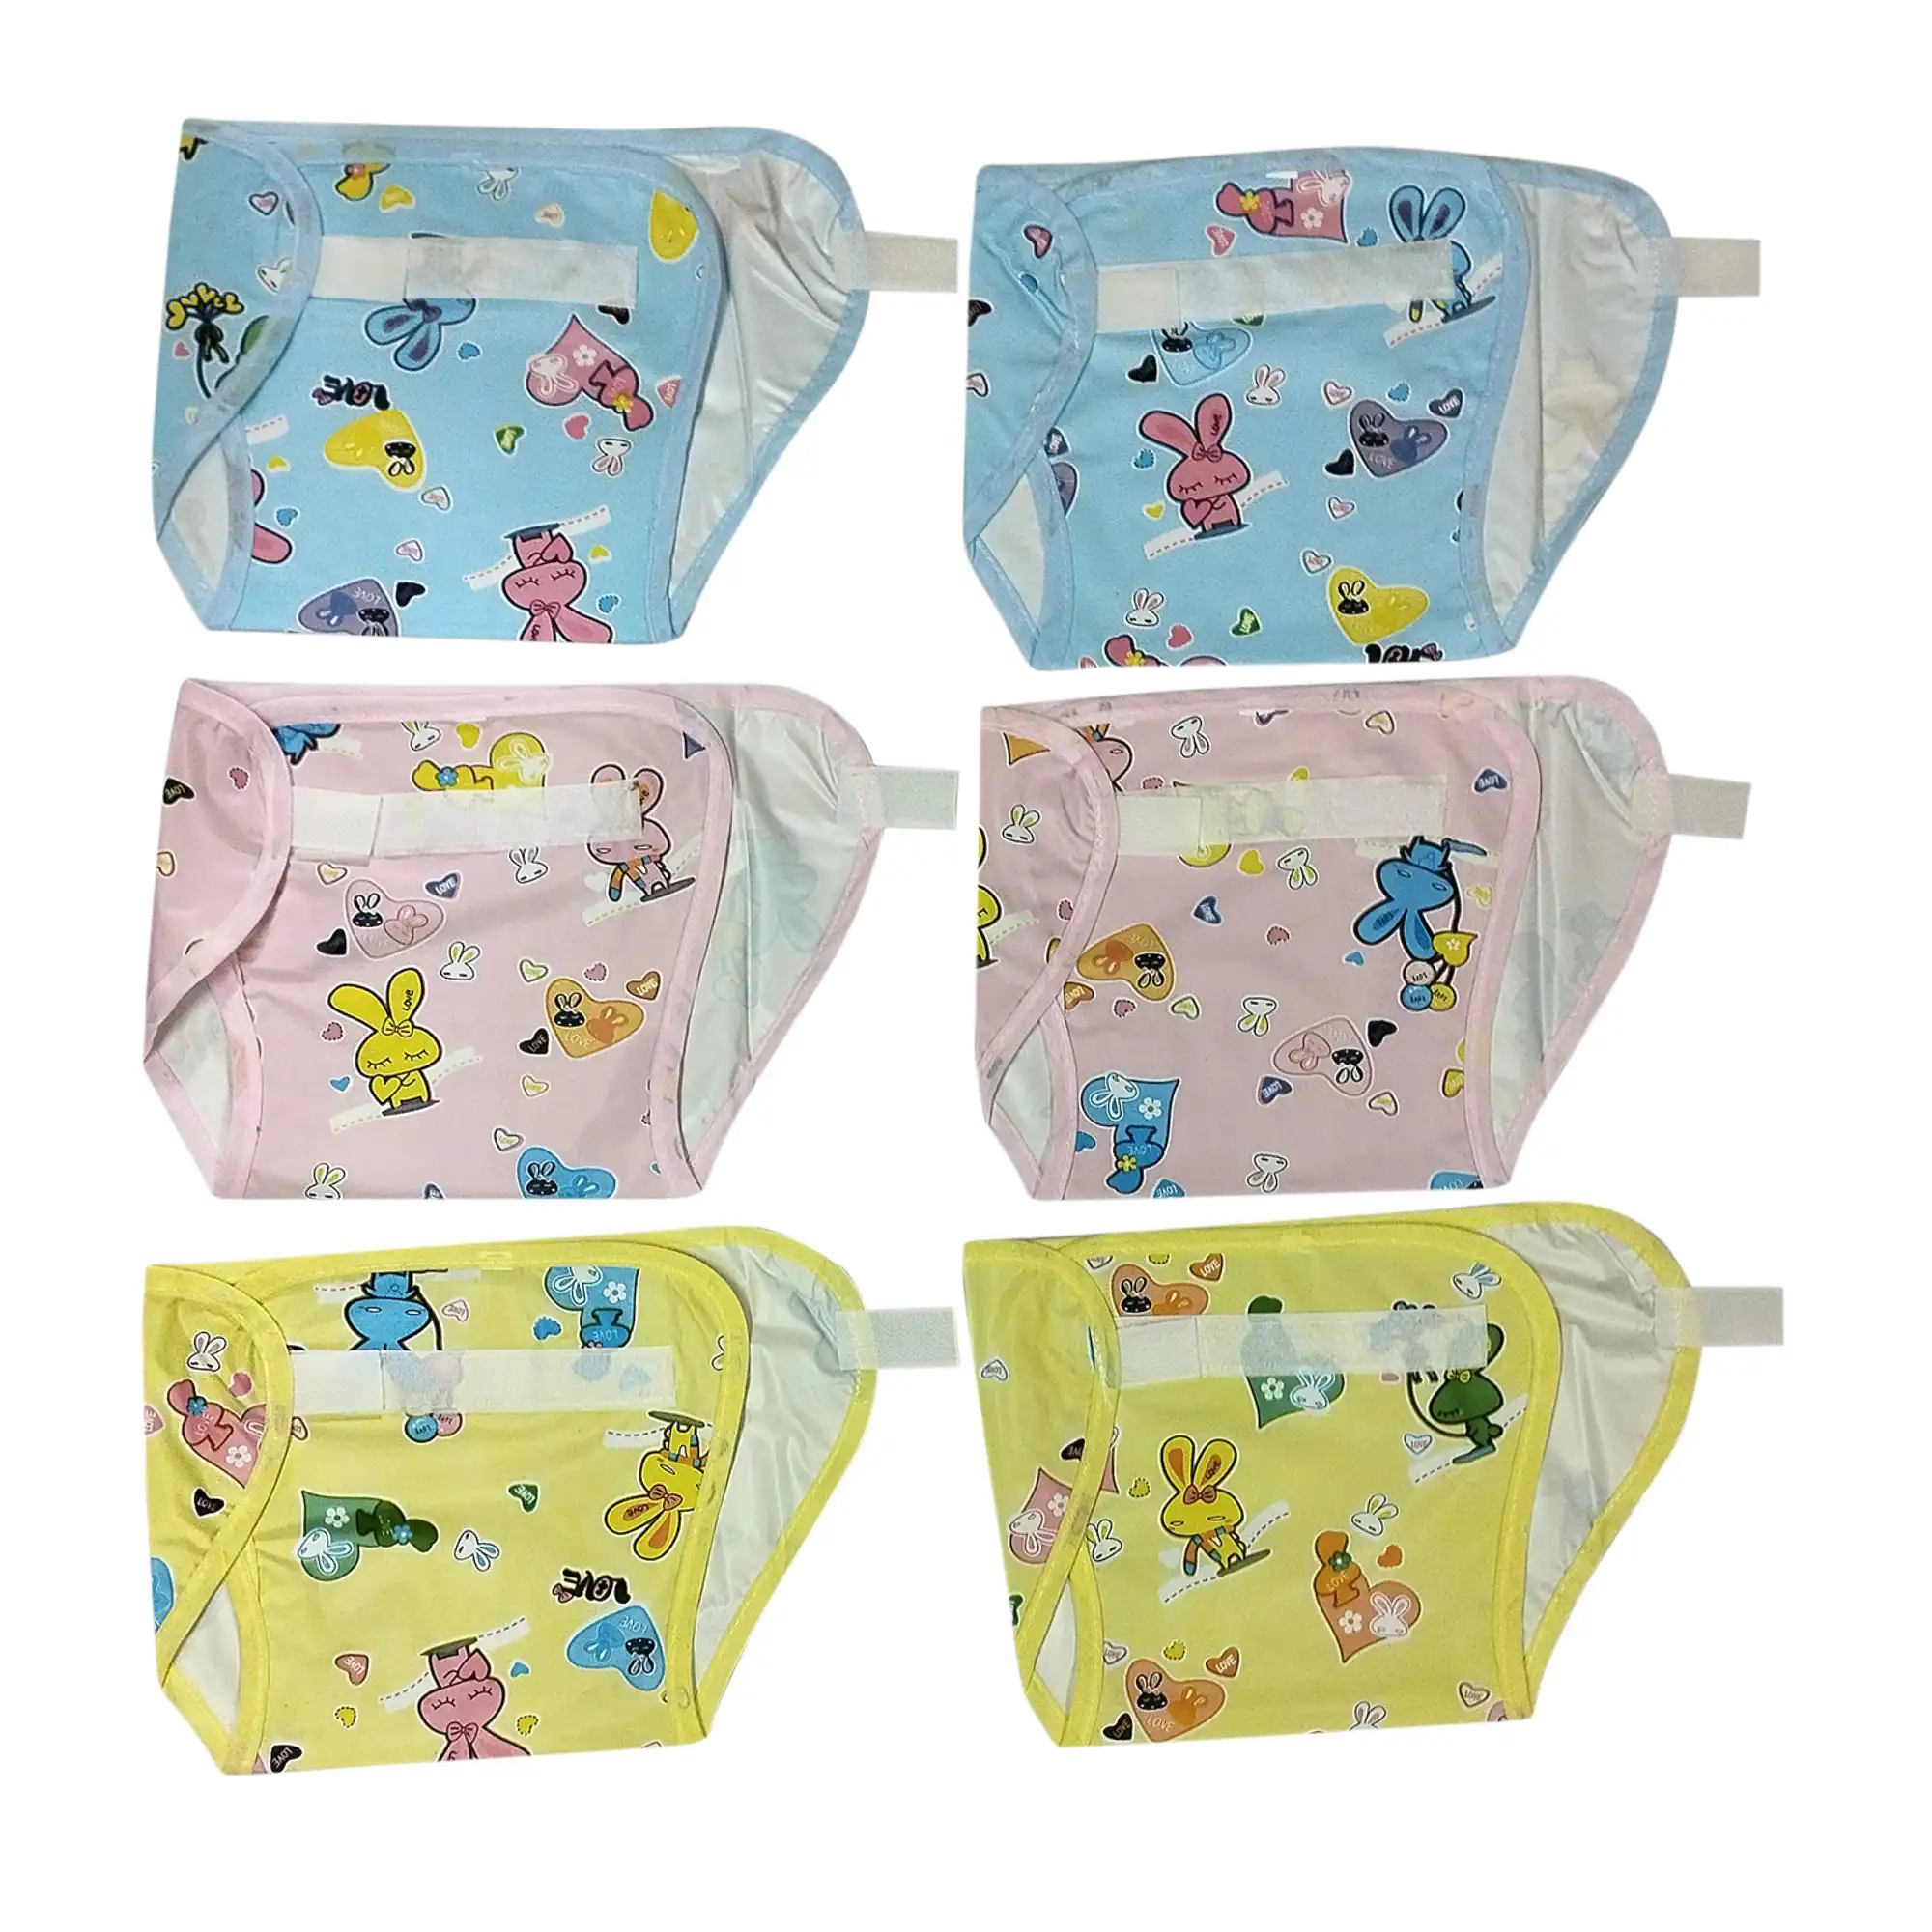 Newborn Imported Plastic Baby Diapers Set of 6 8